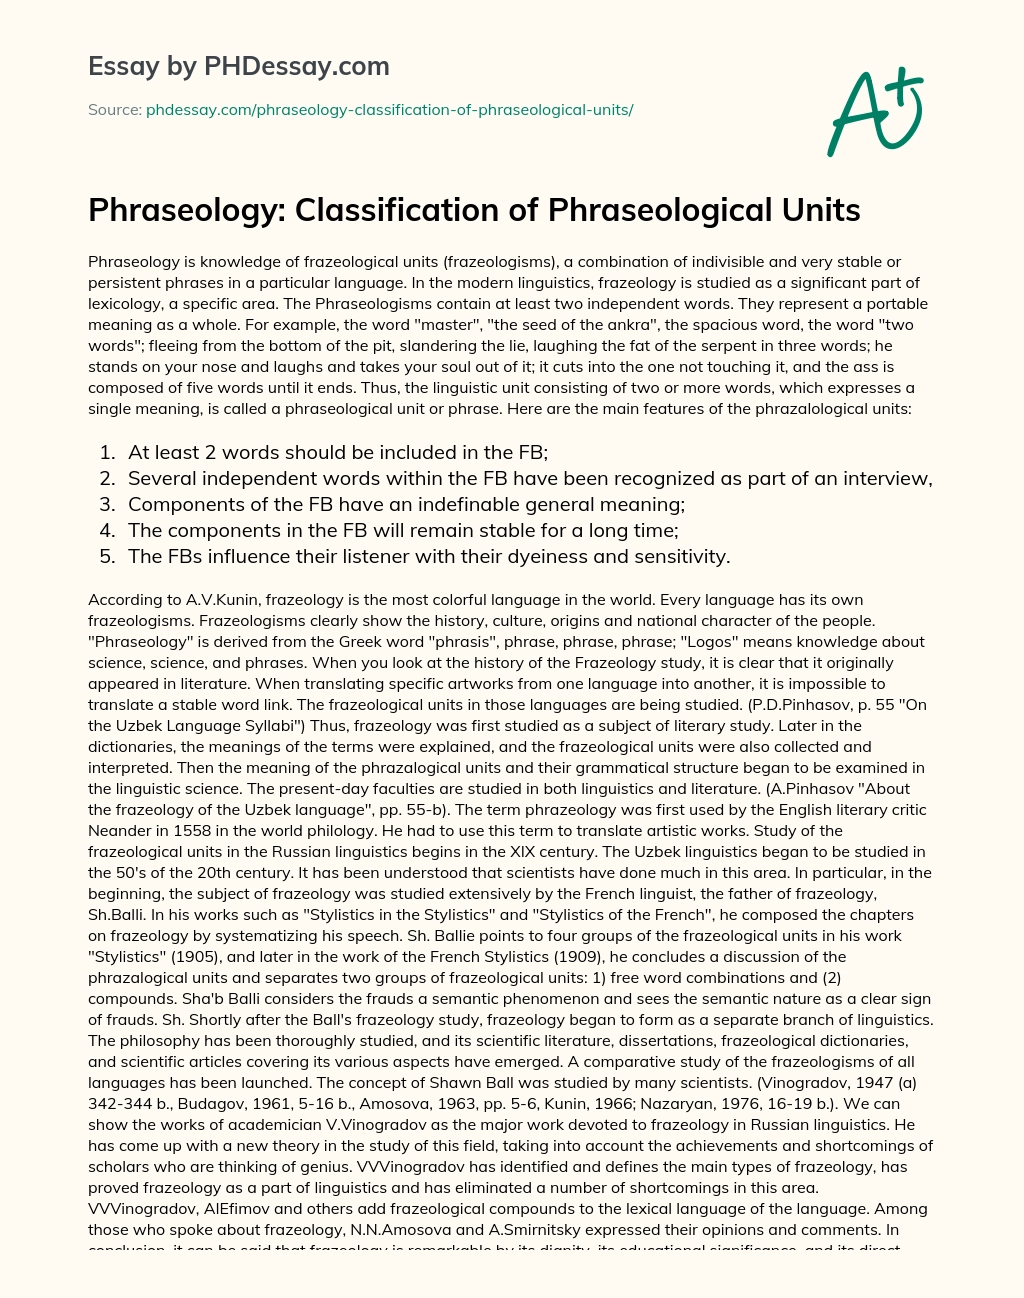 Phraseology: Classification of Phraseological Units essay